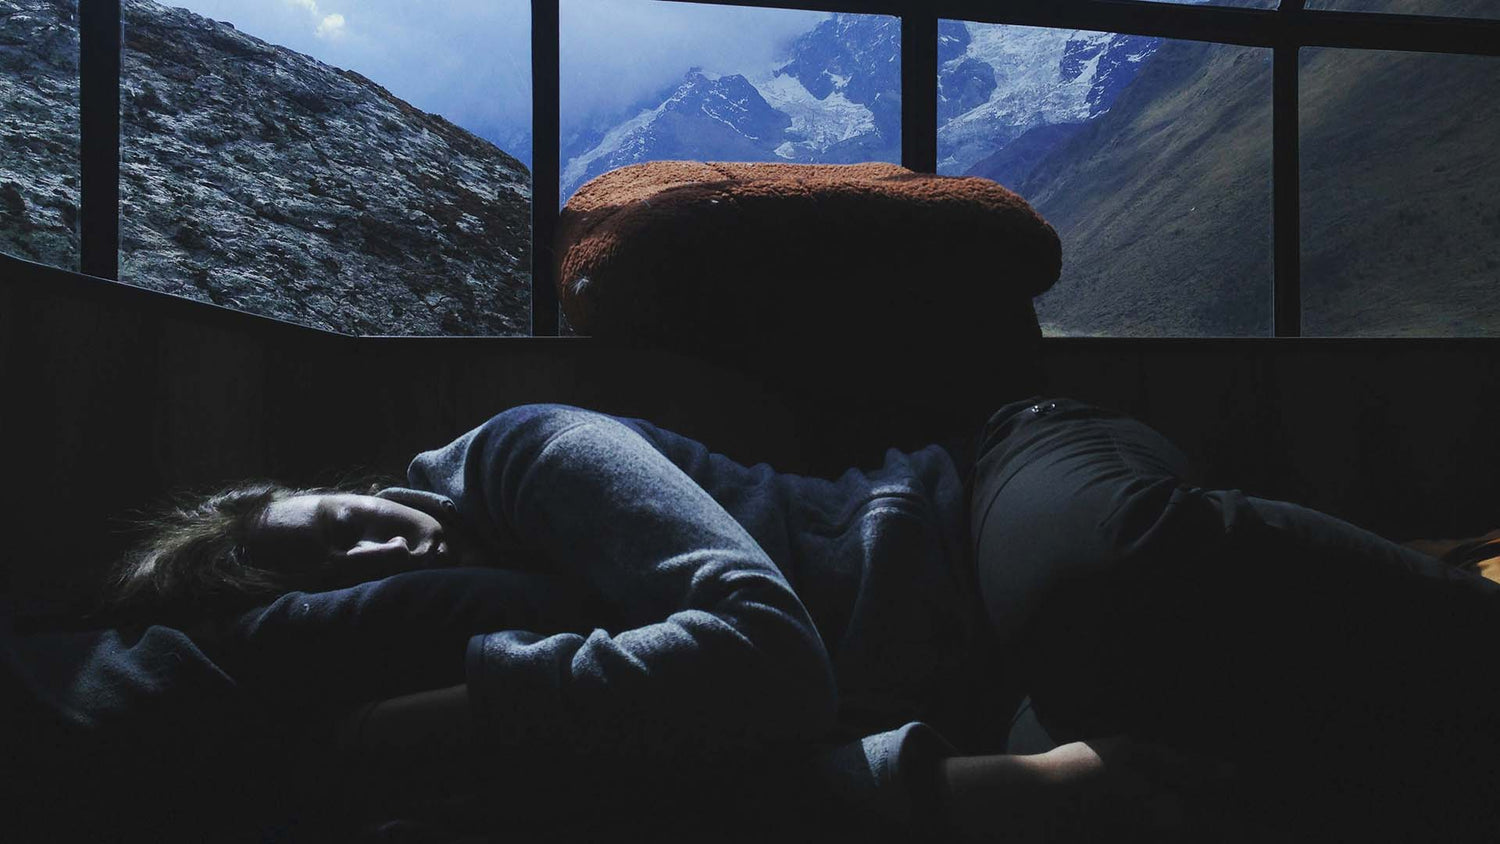 Sleeping person under window with mountain background